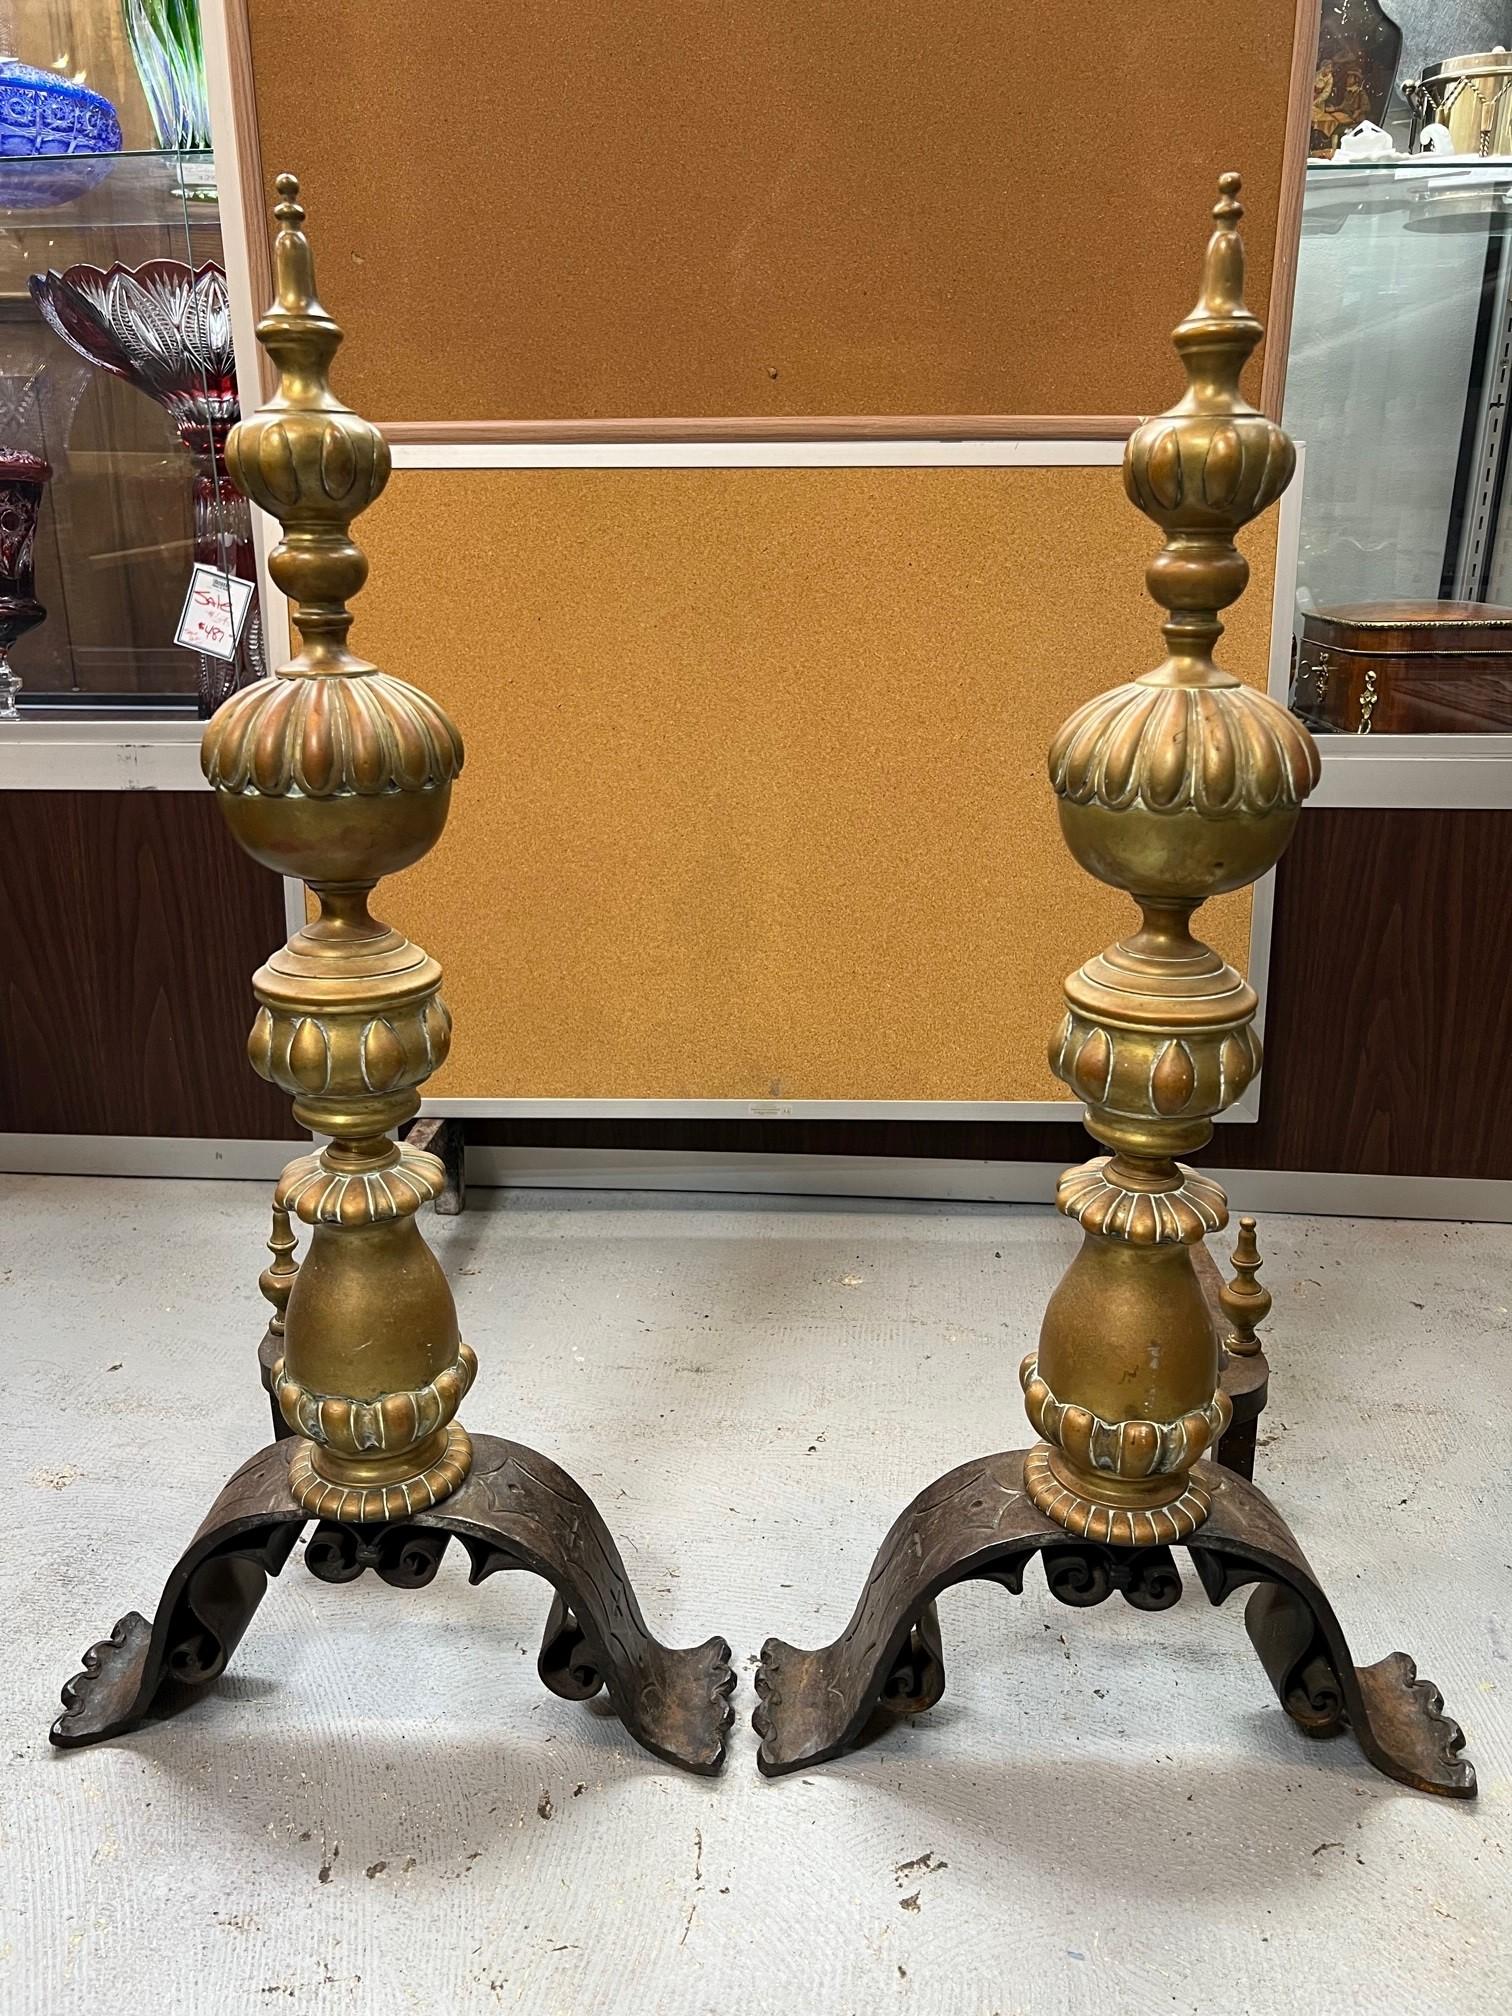 A great pair of Baroque style andirons with a great combination of bronze and iron that gives this pair of andirons a good look. They have a nice patina and are a good size with a long pair of iron dogs or billety bars. 